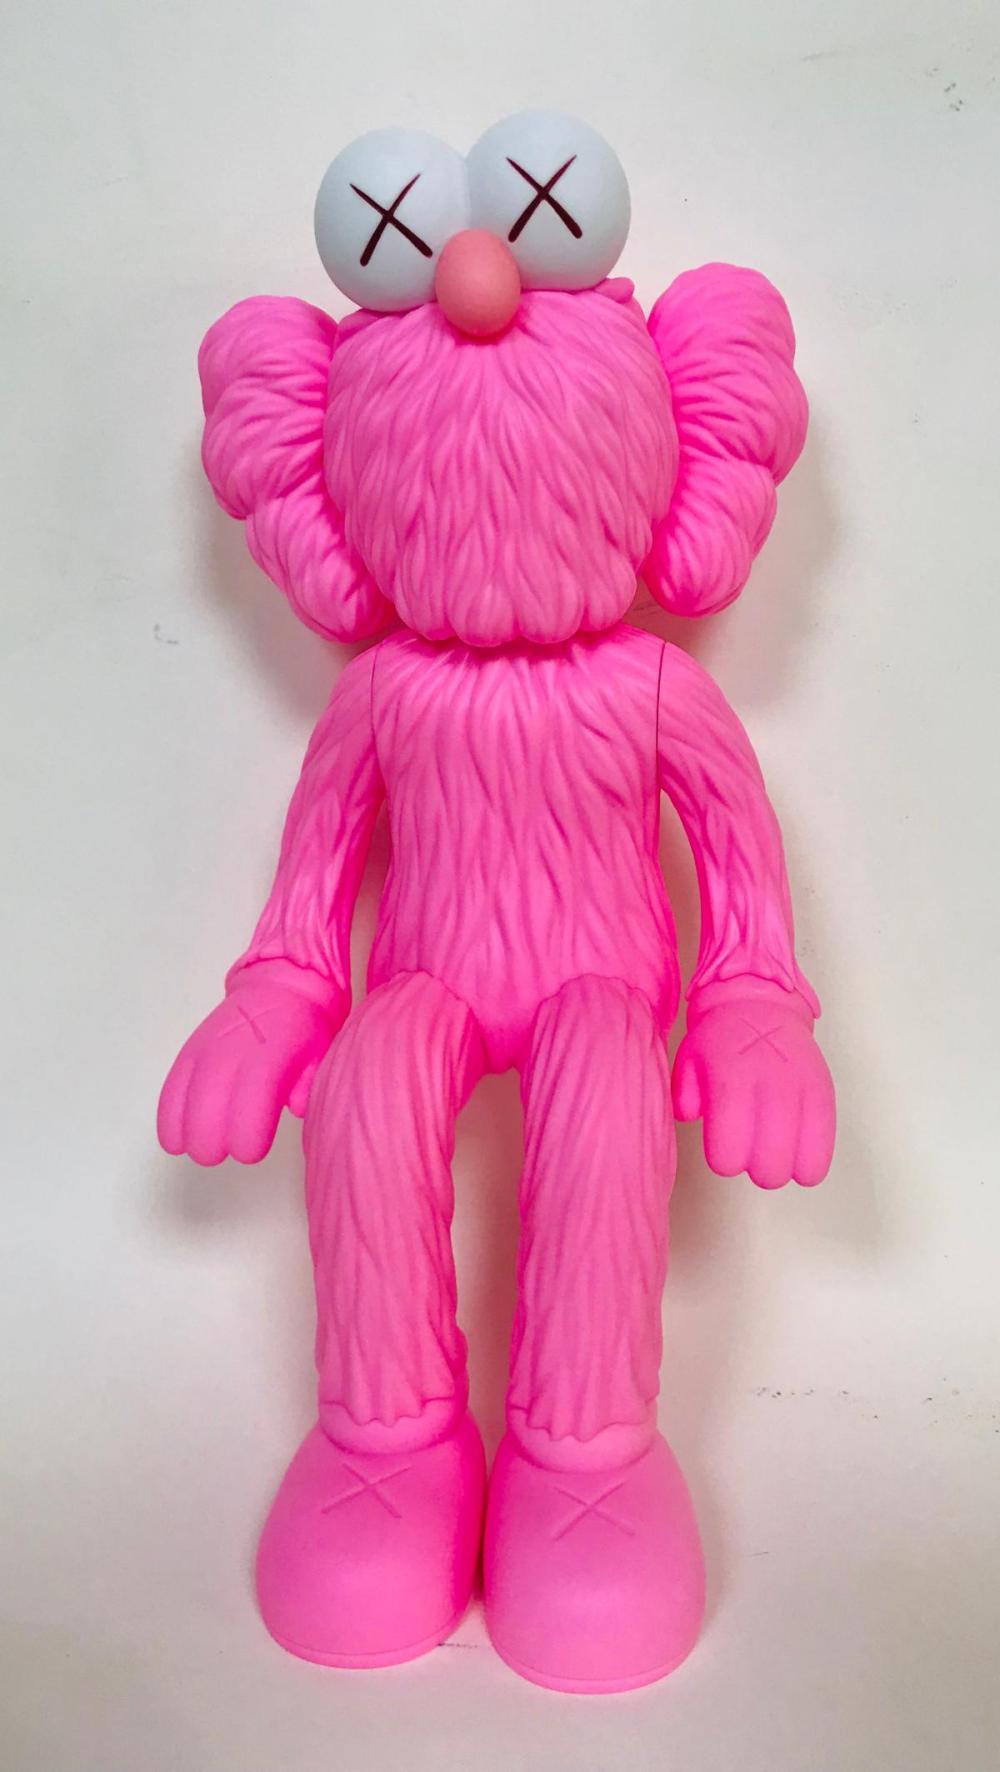 Sold Price: KAWS Pink BFF Companion (KAWS BFF pink) In the Manner Of date PDT